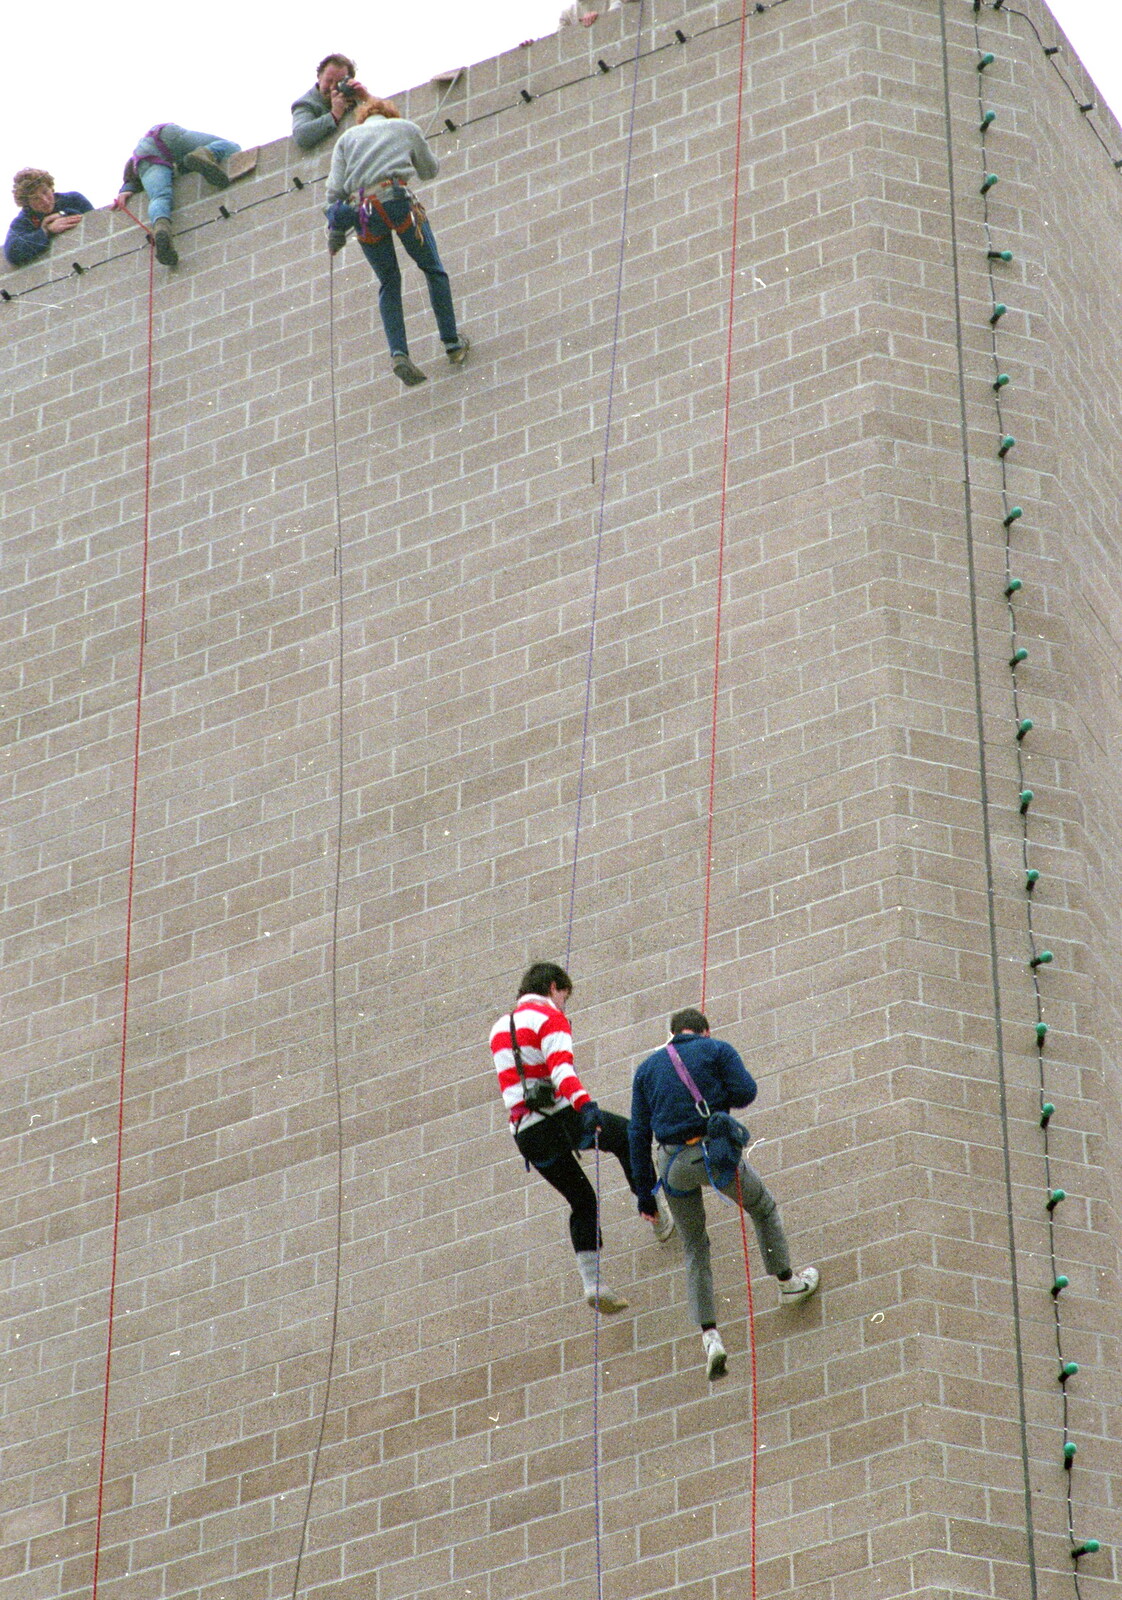 The abseiling society piles off the roof from Uni: RAG Week Abseil, Hitch Hike, and Beaumont Street Life Plymouth, Devon - 13th February 1986